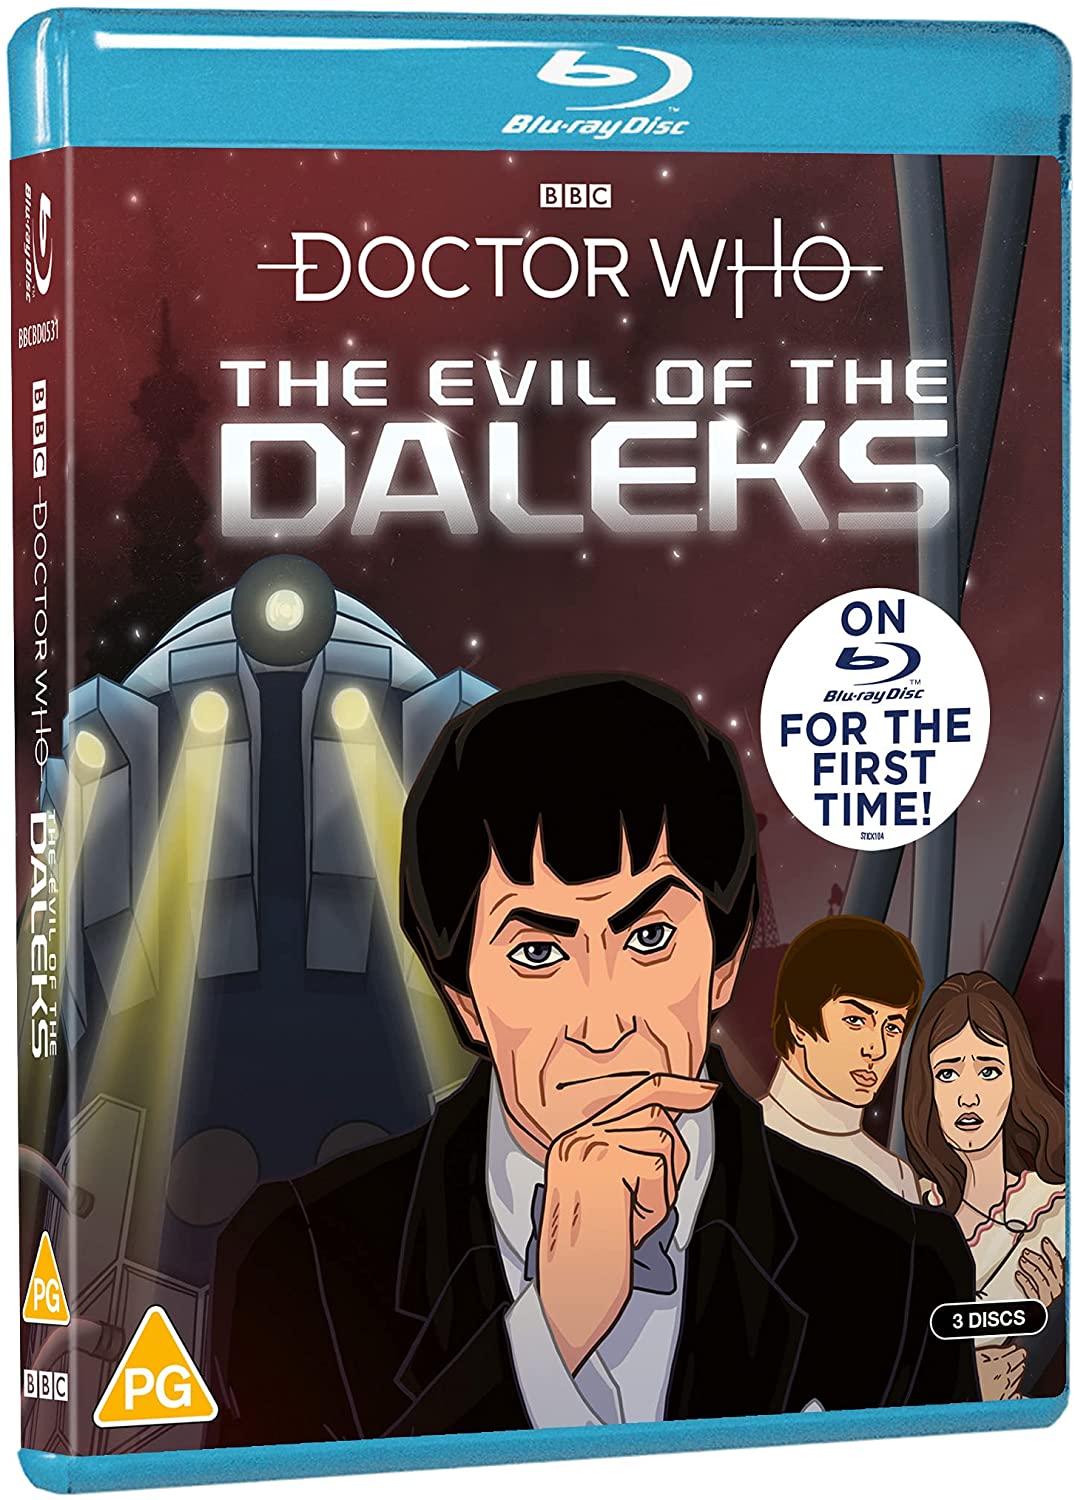 Doctor Who - The Evil of the Daleks [Blu-ray] [2021] - Sci-fi [Blu-ray]